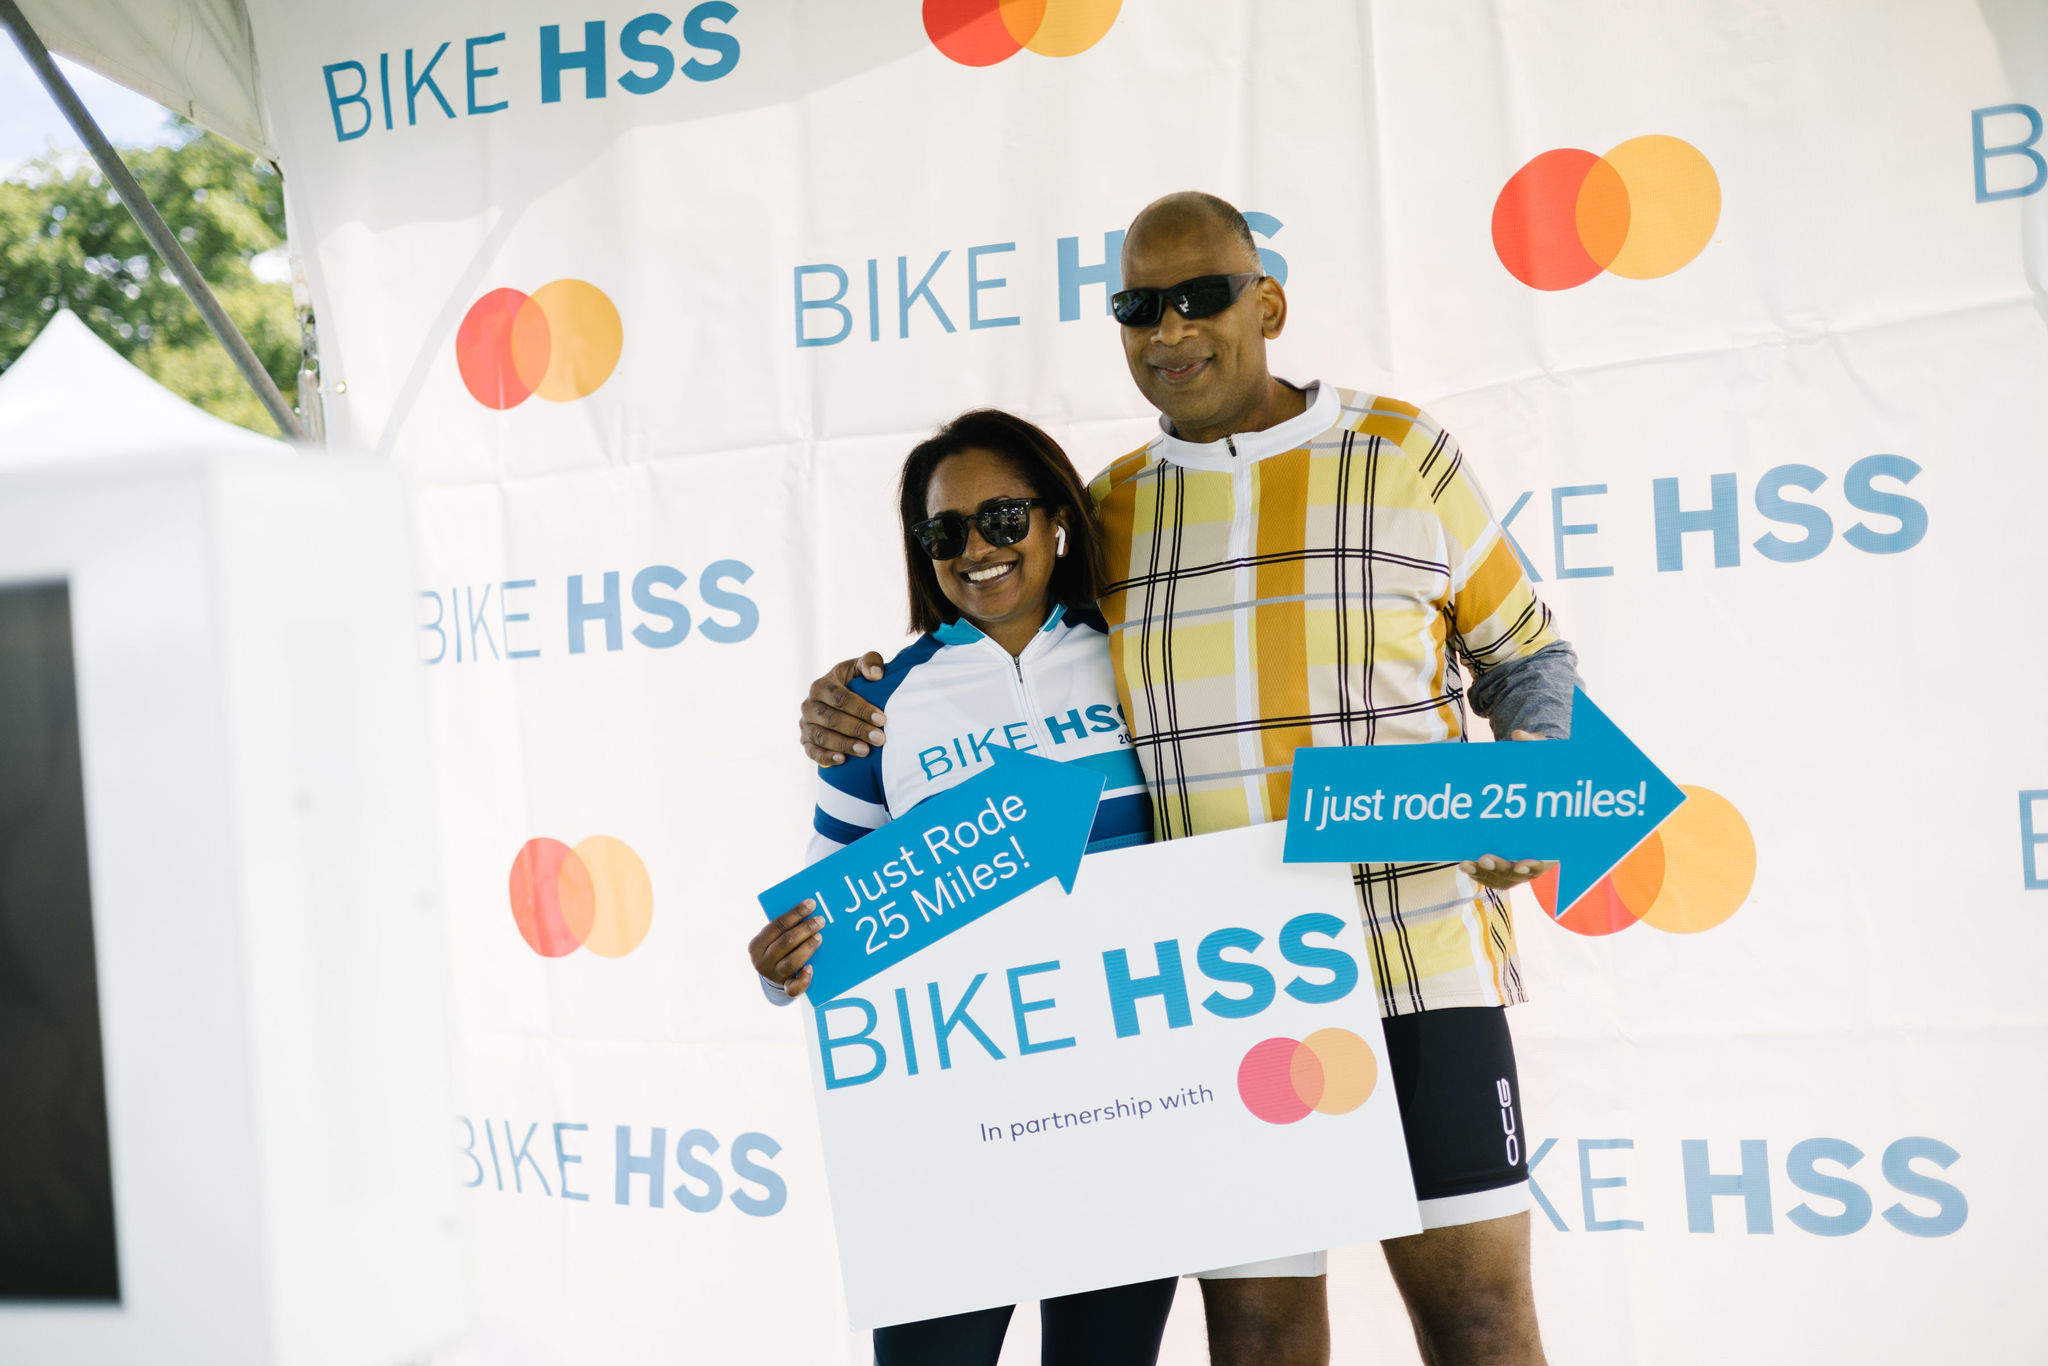 A couple smiling while posing for a photo with a bike and a sign.